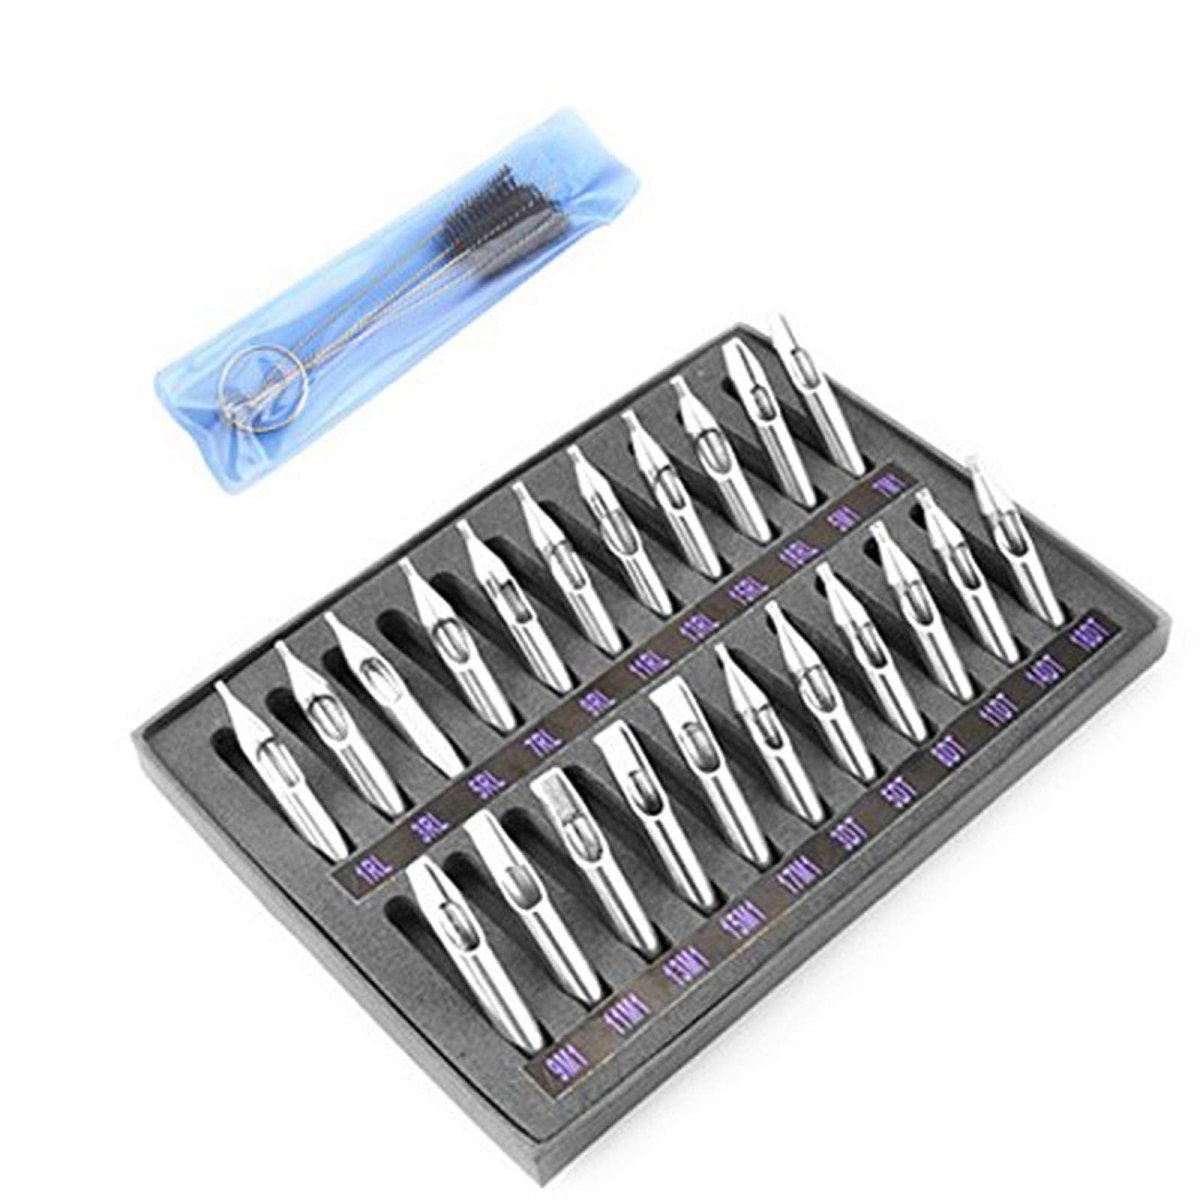 Stainless Steel Tattoo Tip Kit with Cleaning Brush - 22pcs - Tattoo Unleashed